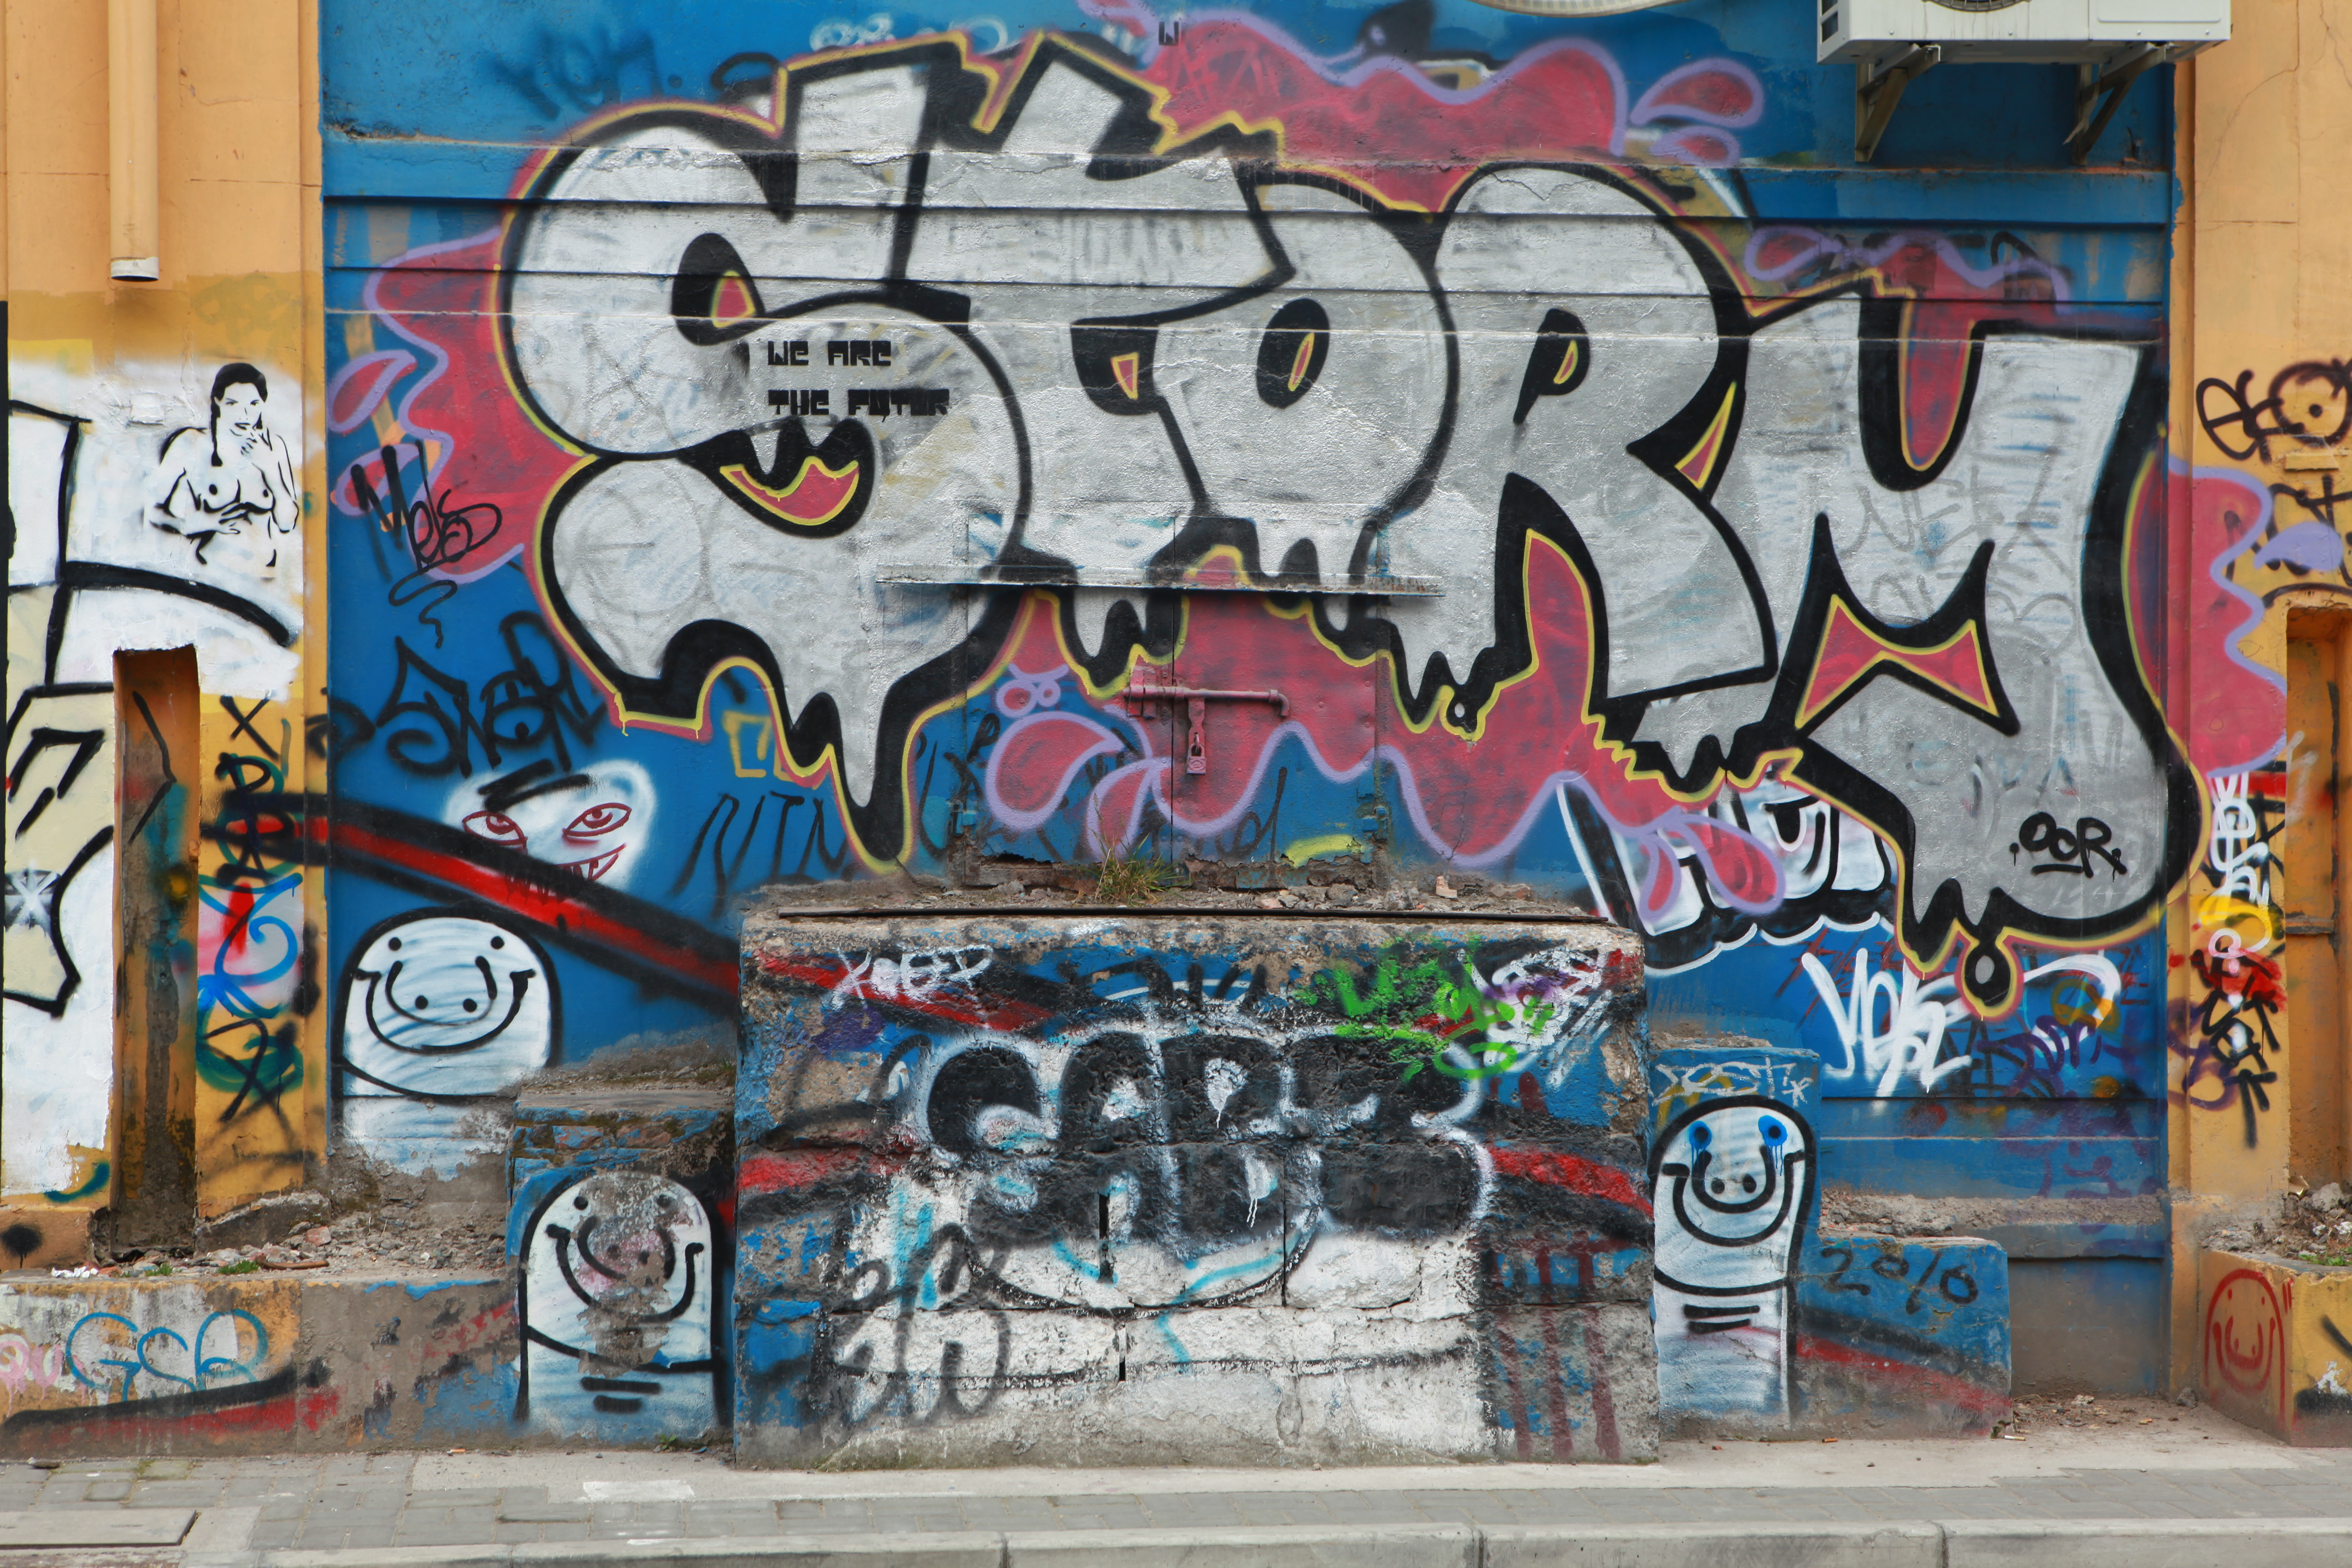 A Vision of Self Expression: The Graffiti Art of Shanghai